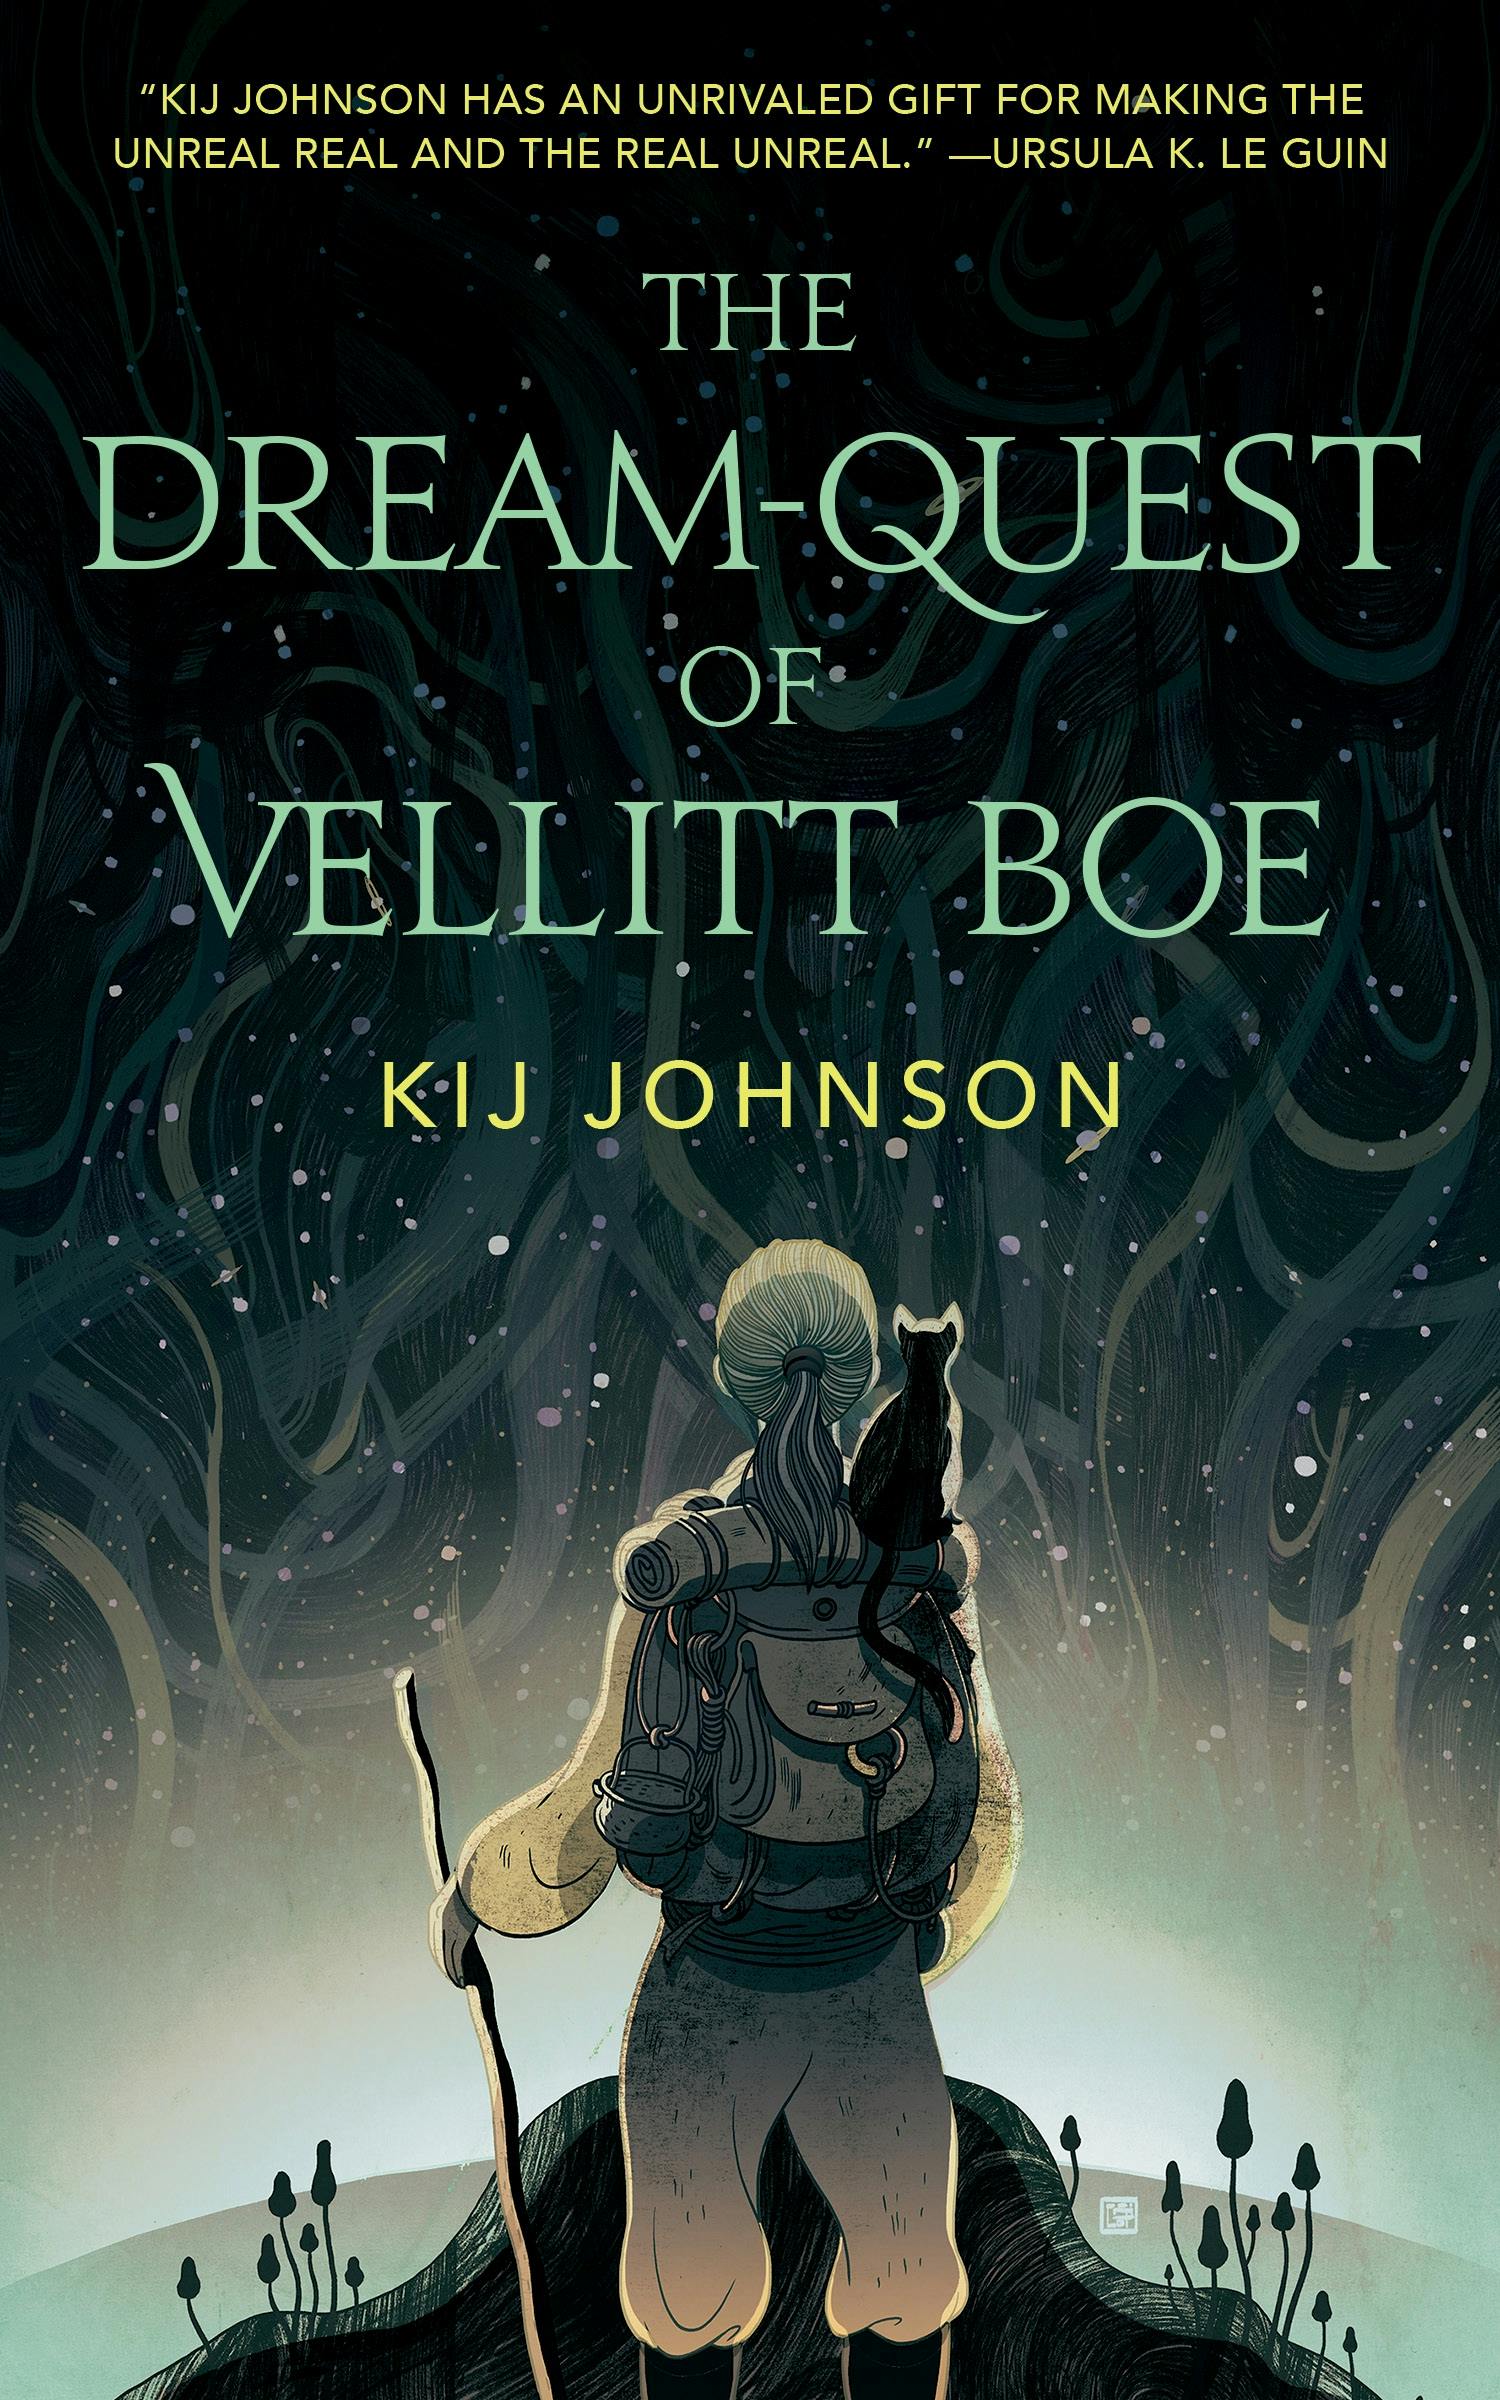 Cover for the book titled as: The Dream-Quest of Vellitt Boe